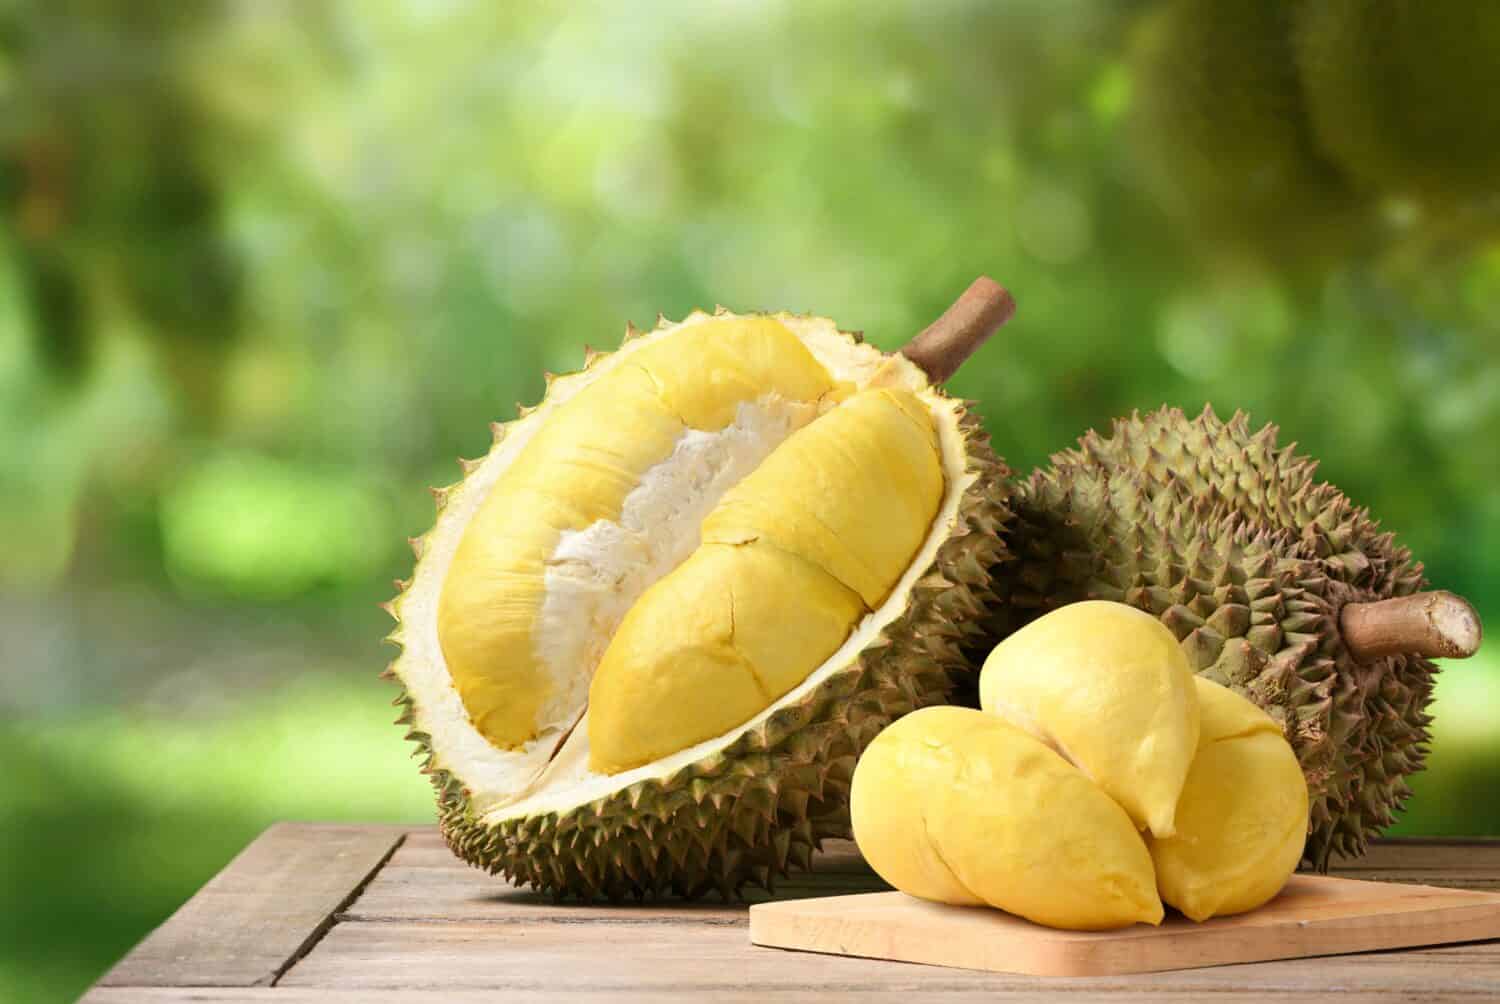 Durian fruit on wooden table with blur durian plantation background.